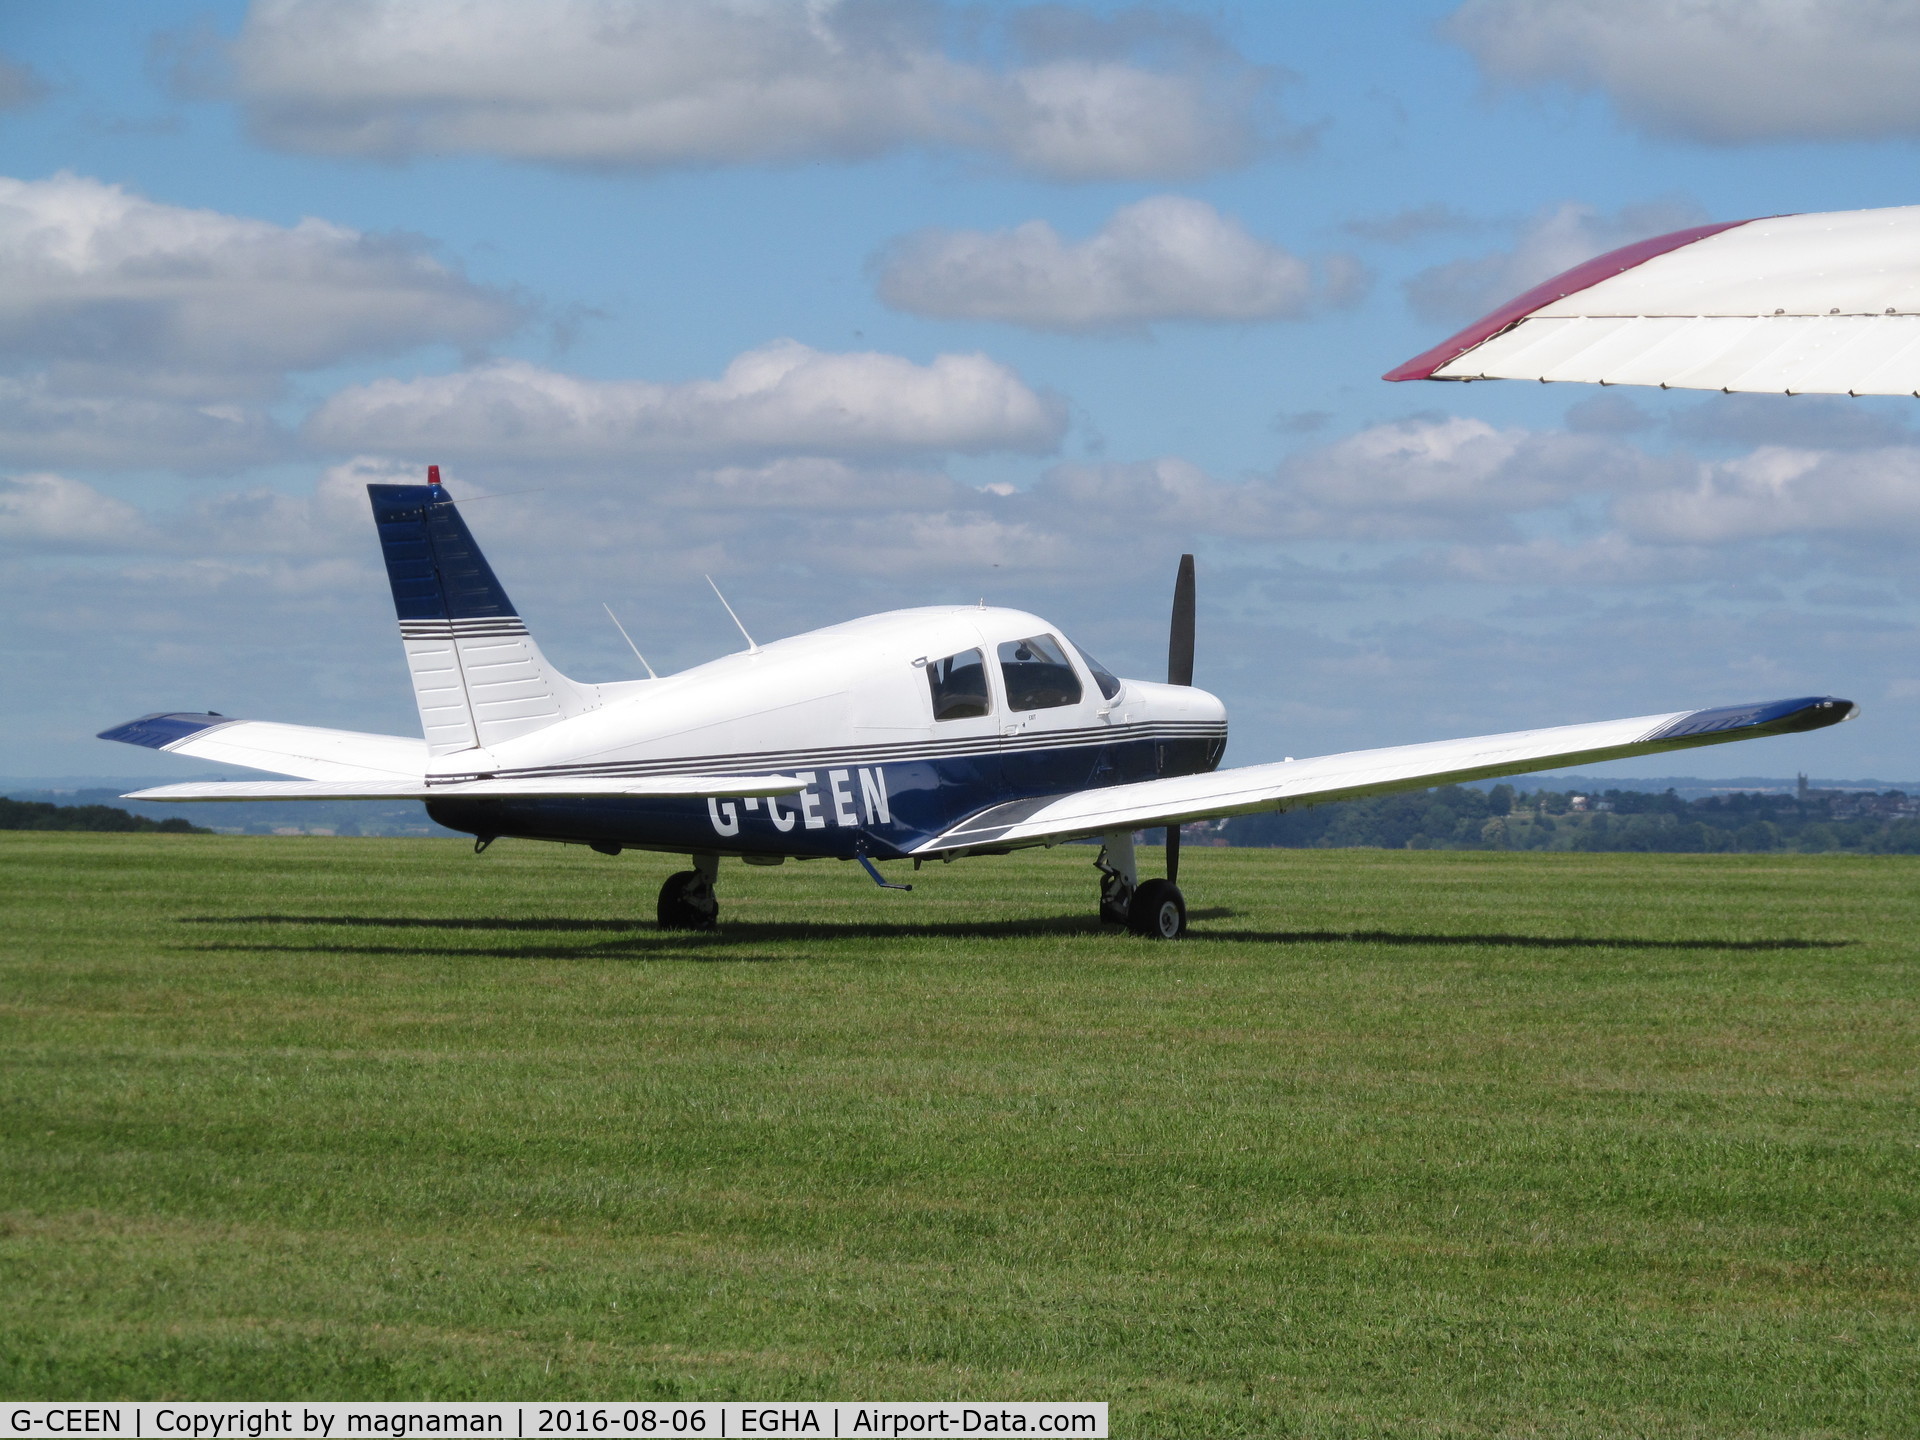 G-CEEN, 1990 Piper PA-28-161 Cadet C/N 2841293, old cherokee